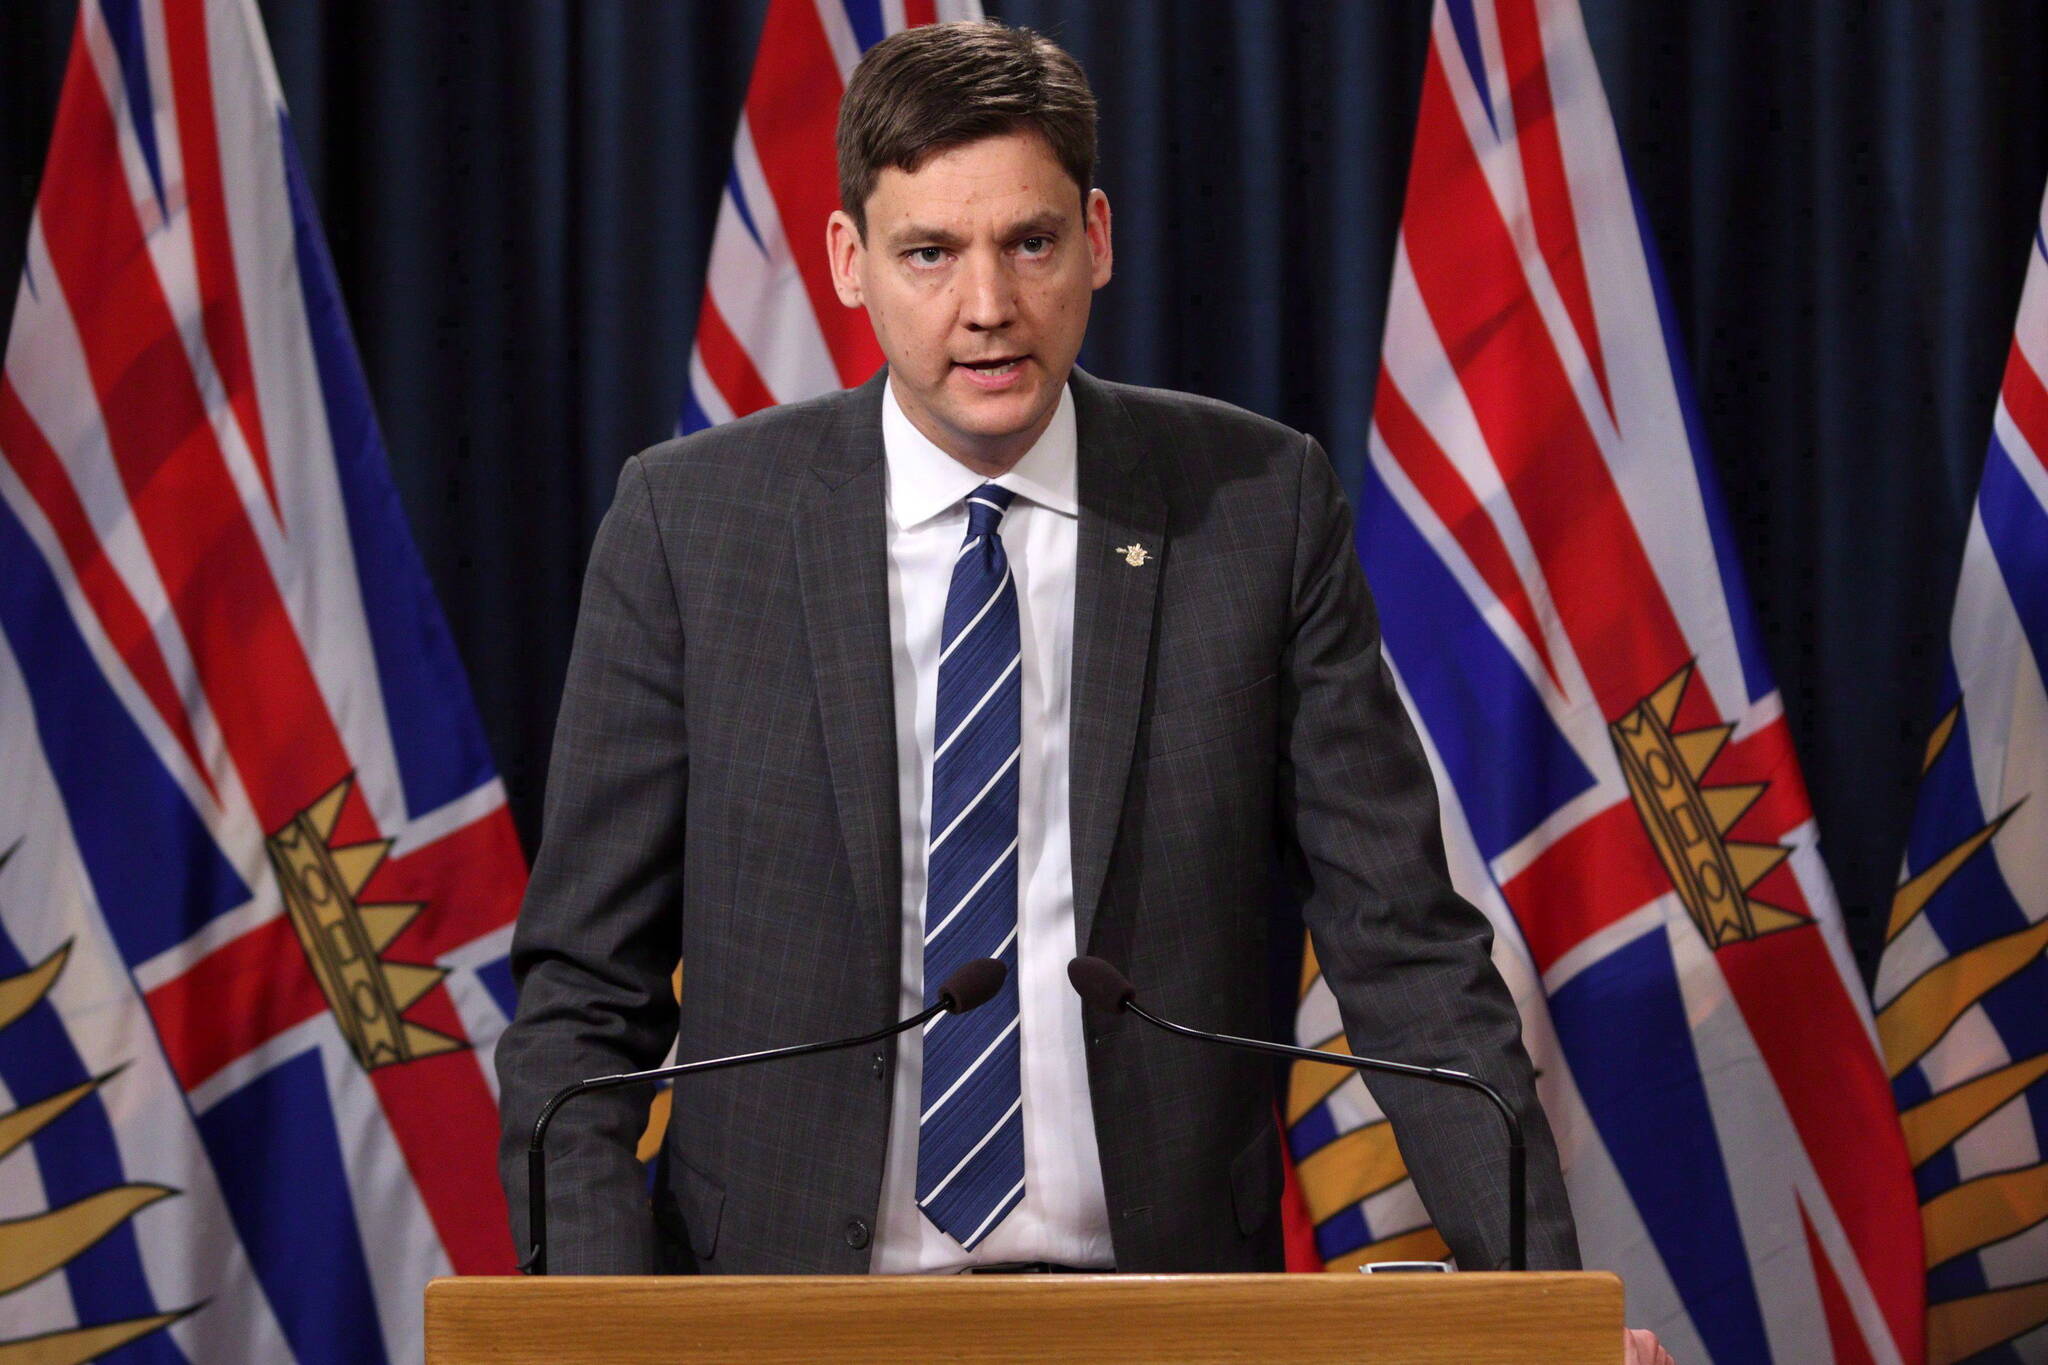 Premier David Eby said concerns about security and changing environmental norms in Asia promise significant opportunities for British Columbia. (Photo: THE CANADIAN PRESS/Chad Hipolito)